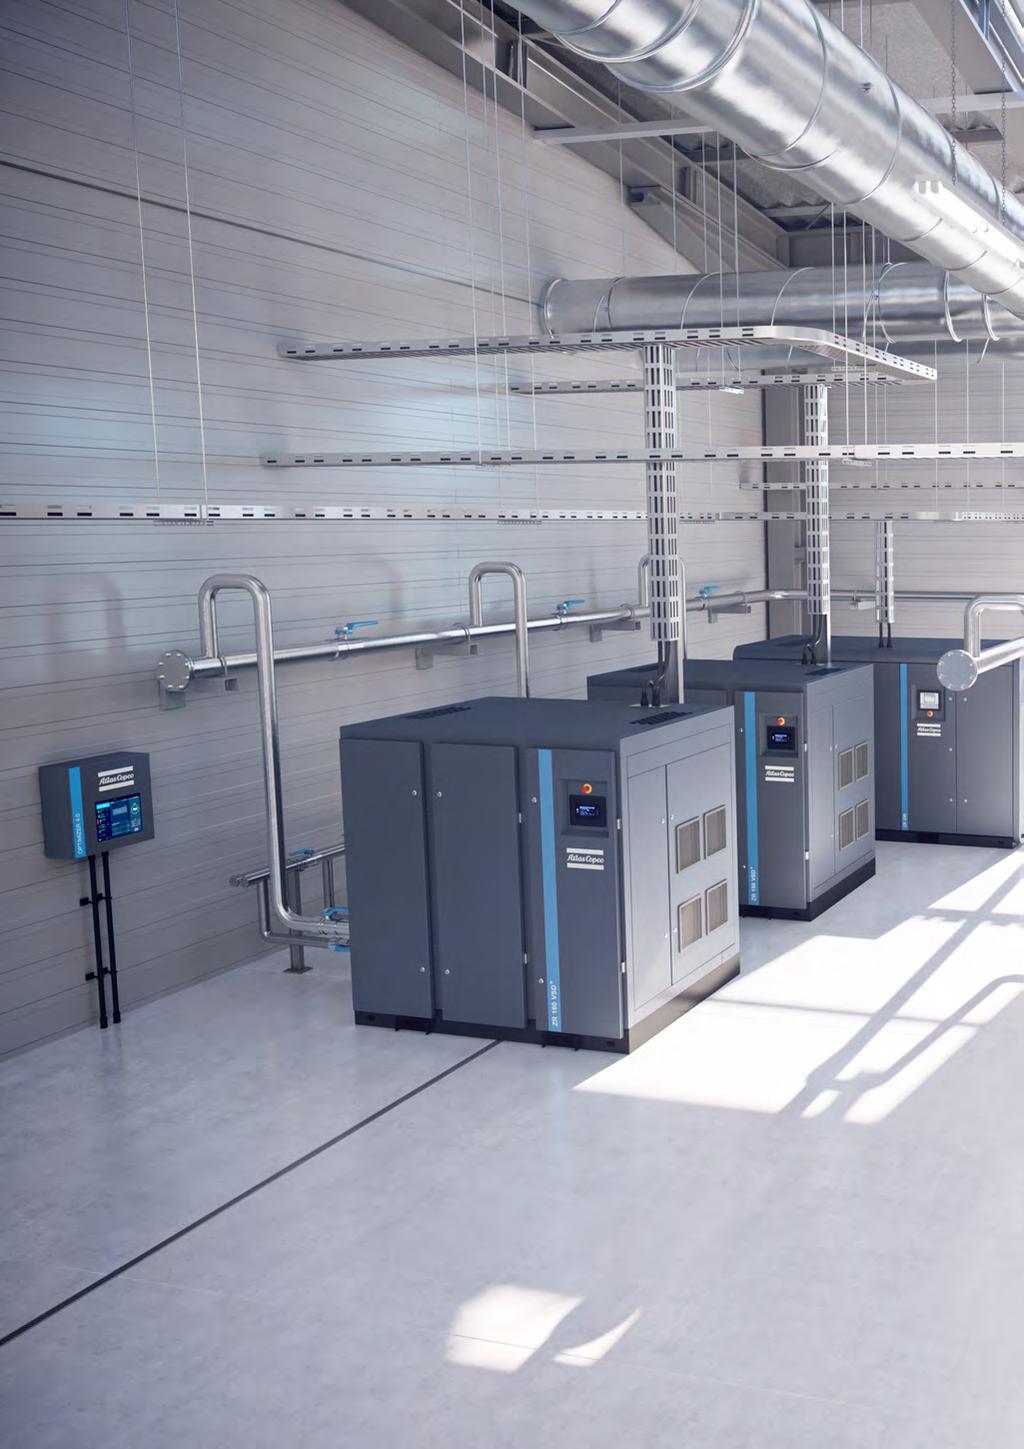 Setting the standard in energy efficiency, safety and reliability The shortest route to superior productivity is to minimize operational cost while maintaining an uninterrupted supply of the right